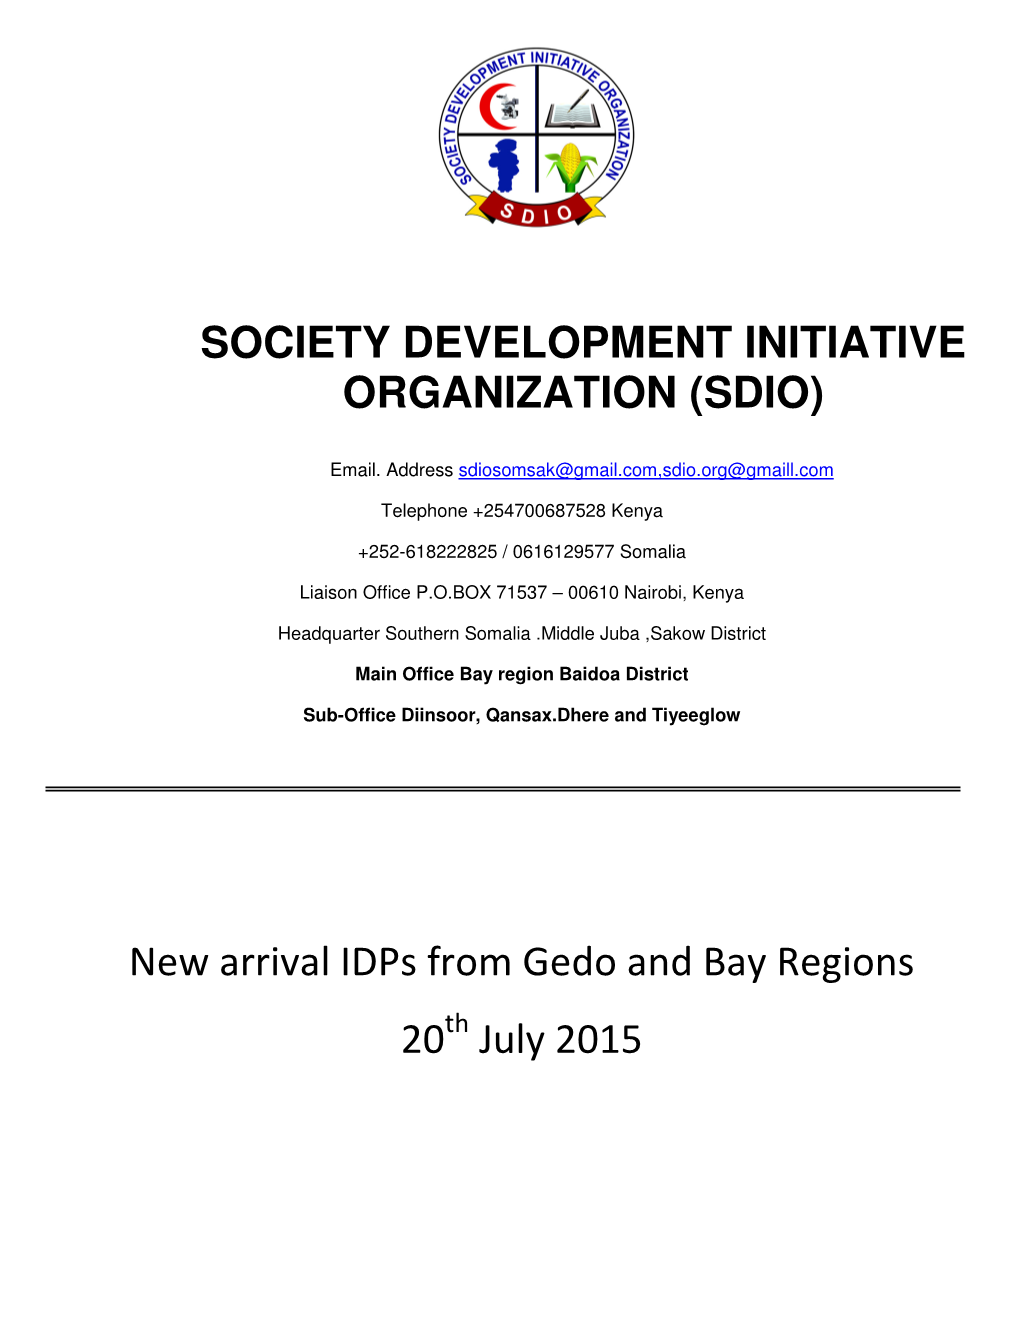 New Arrival Idps from Gedo and Bay Regions 20 July 2015